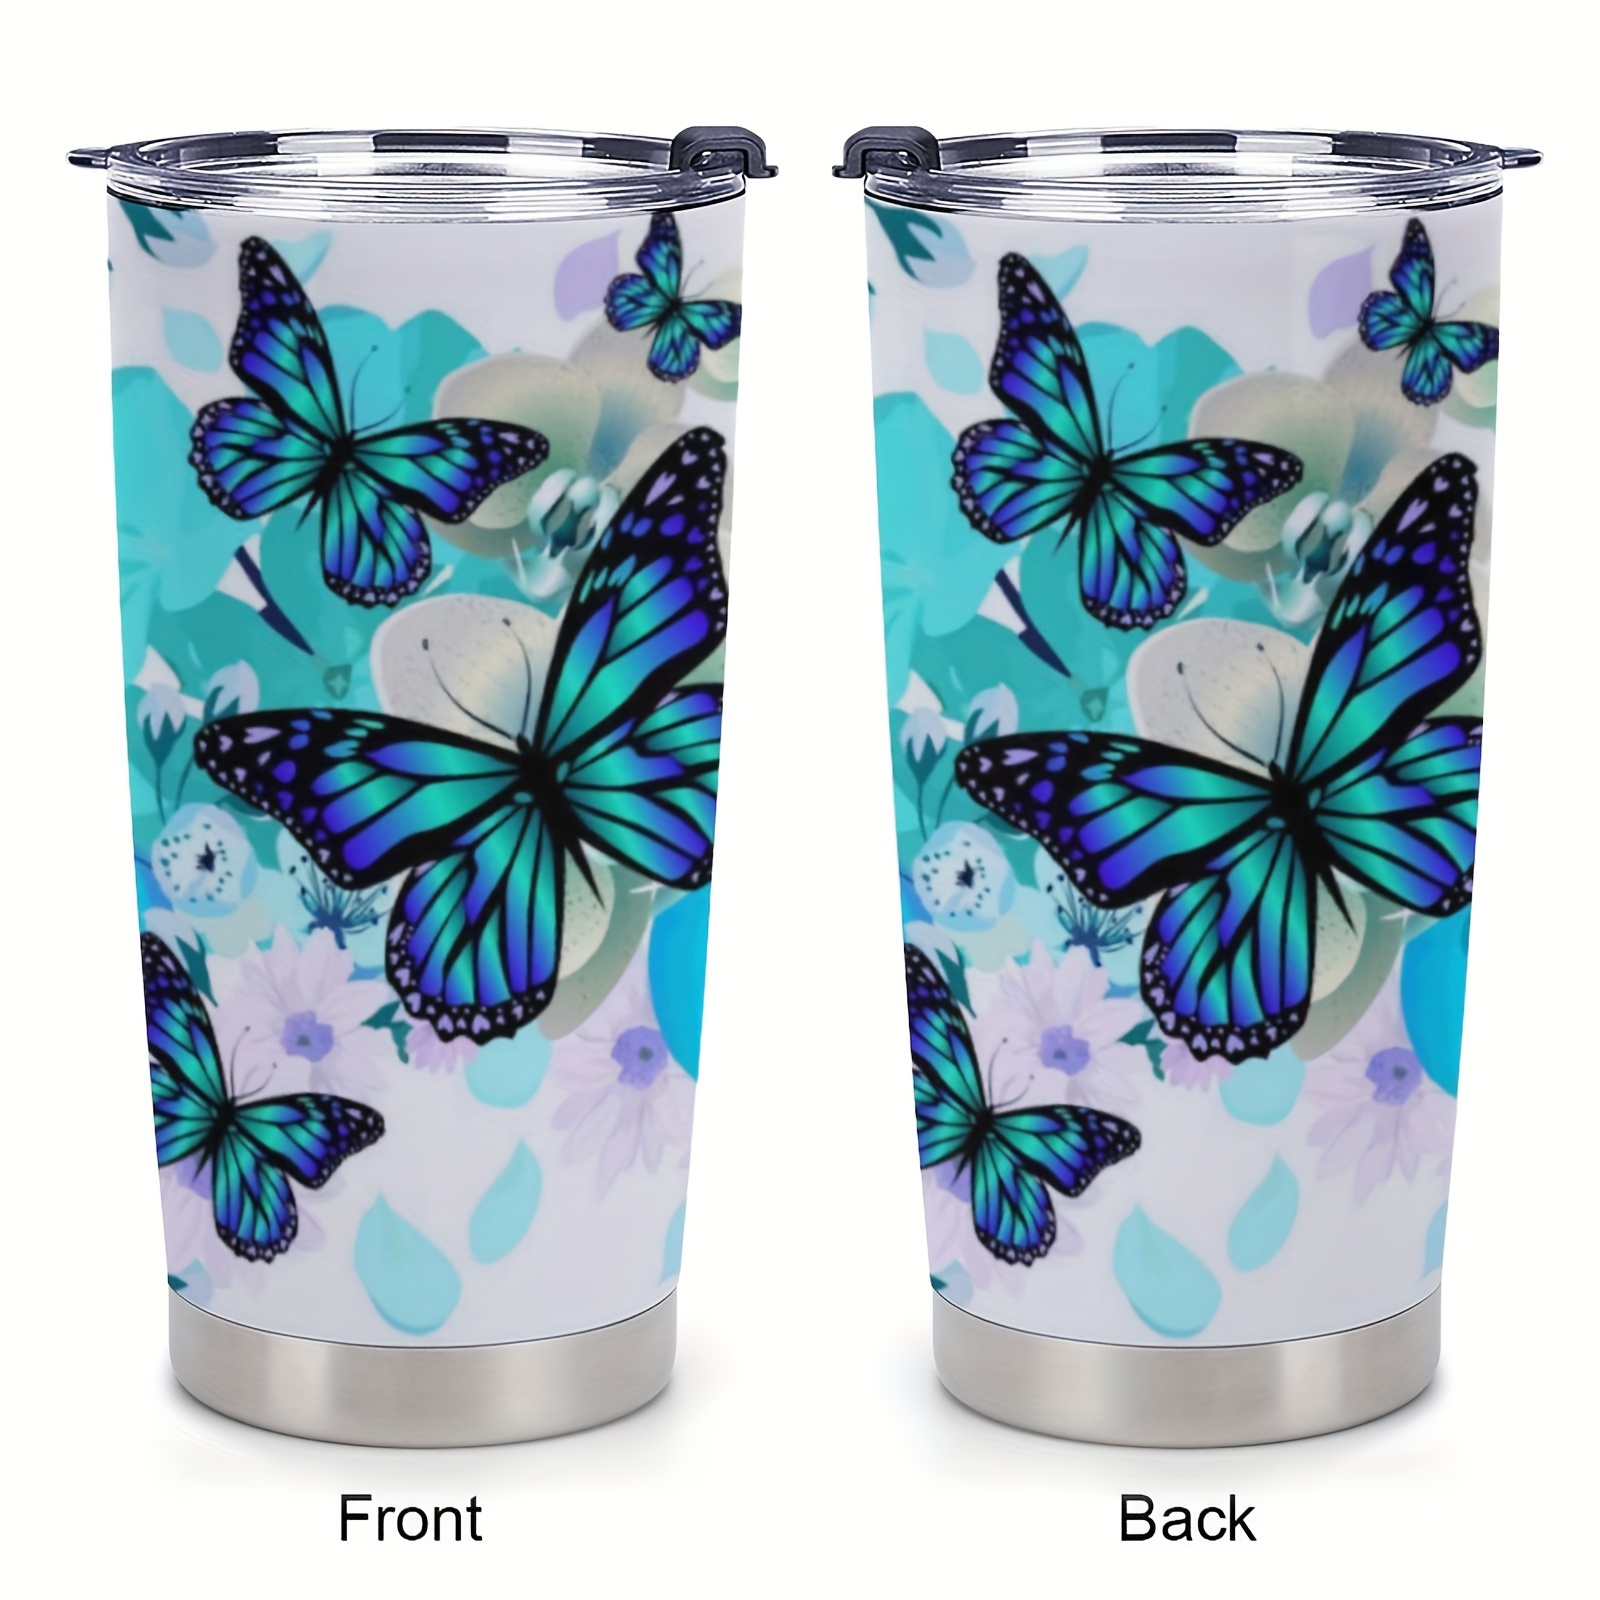 Butterfly Tumbler, Blue Purple Butterfly Gift, Butterfly Drinking  Glasses/Tea Cup/Coffee Mug, Butterfly Decor Accessories- Butterfly Gifts  for Women